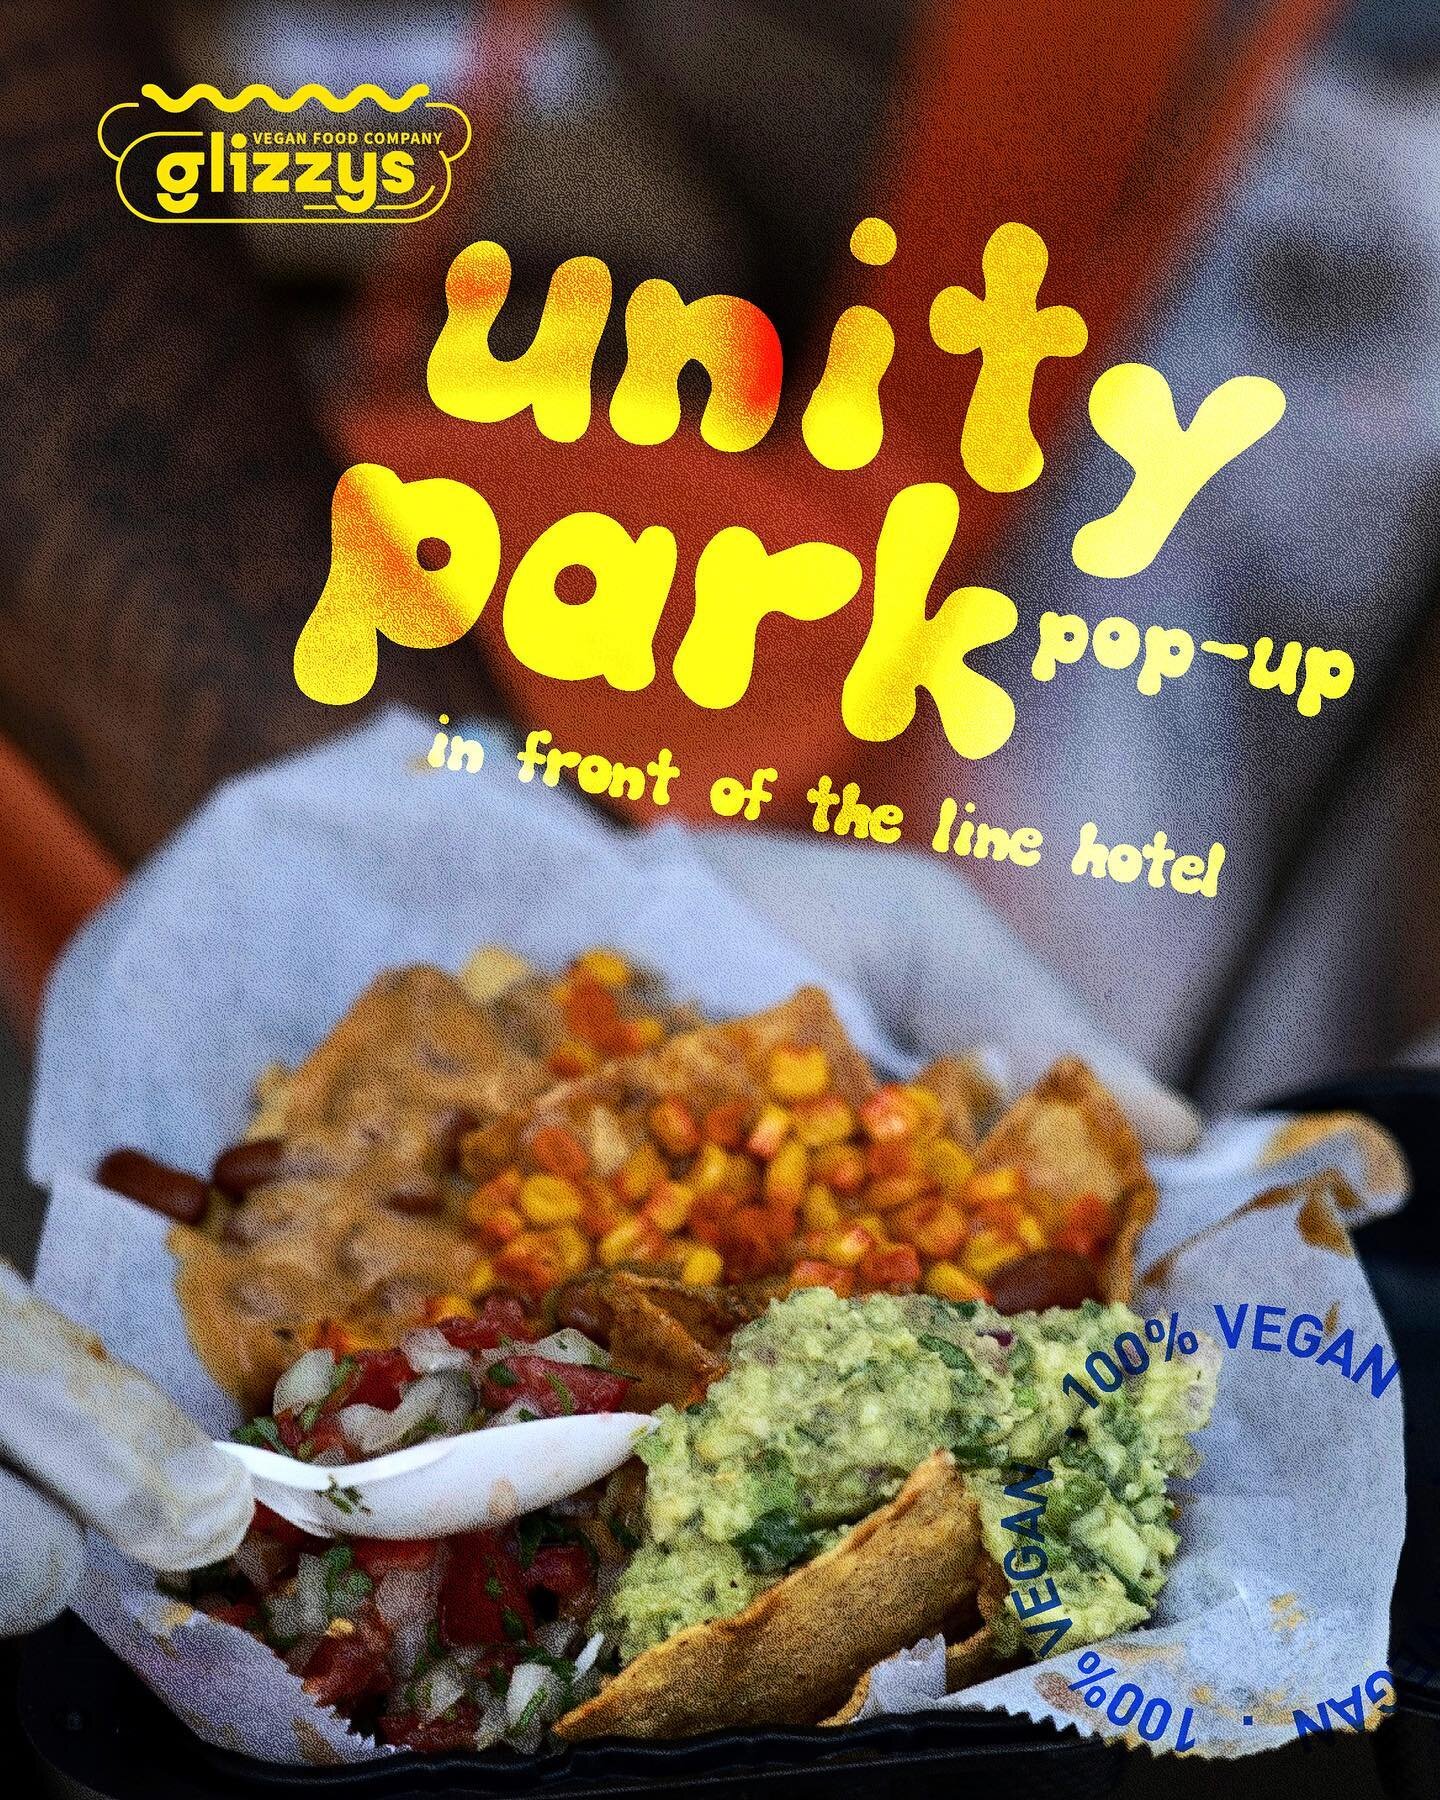 Saturday, 8/6 from 1-6pm join us at our pop-up event at Unity Park (in front of The Line Hotel) 🌭 Get there early tomorrow before we sellout!